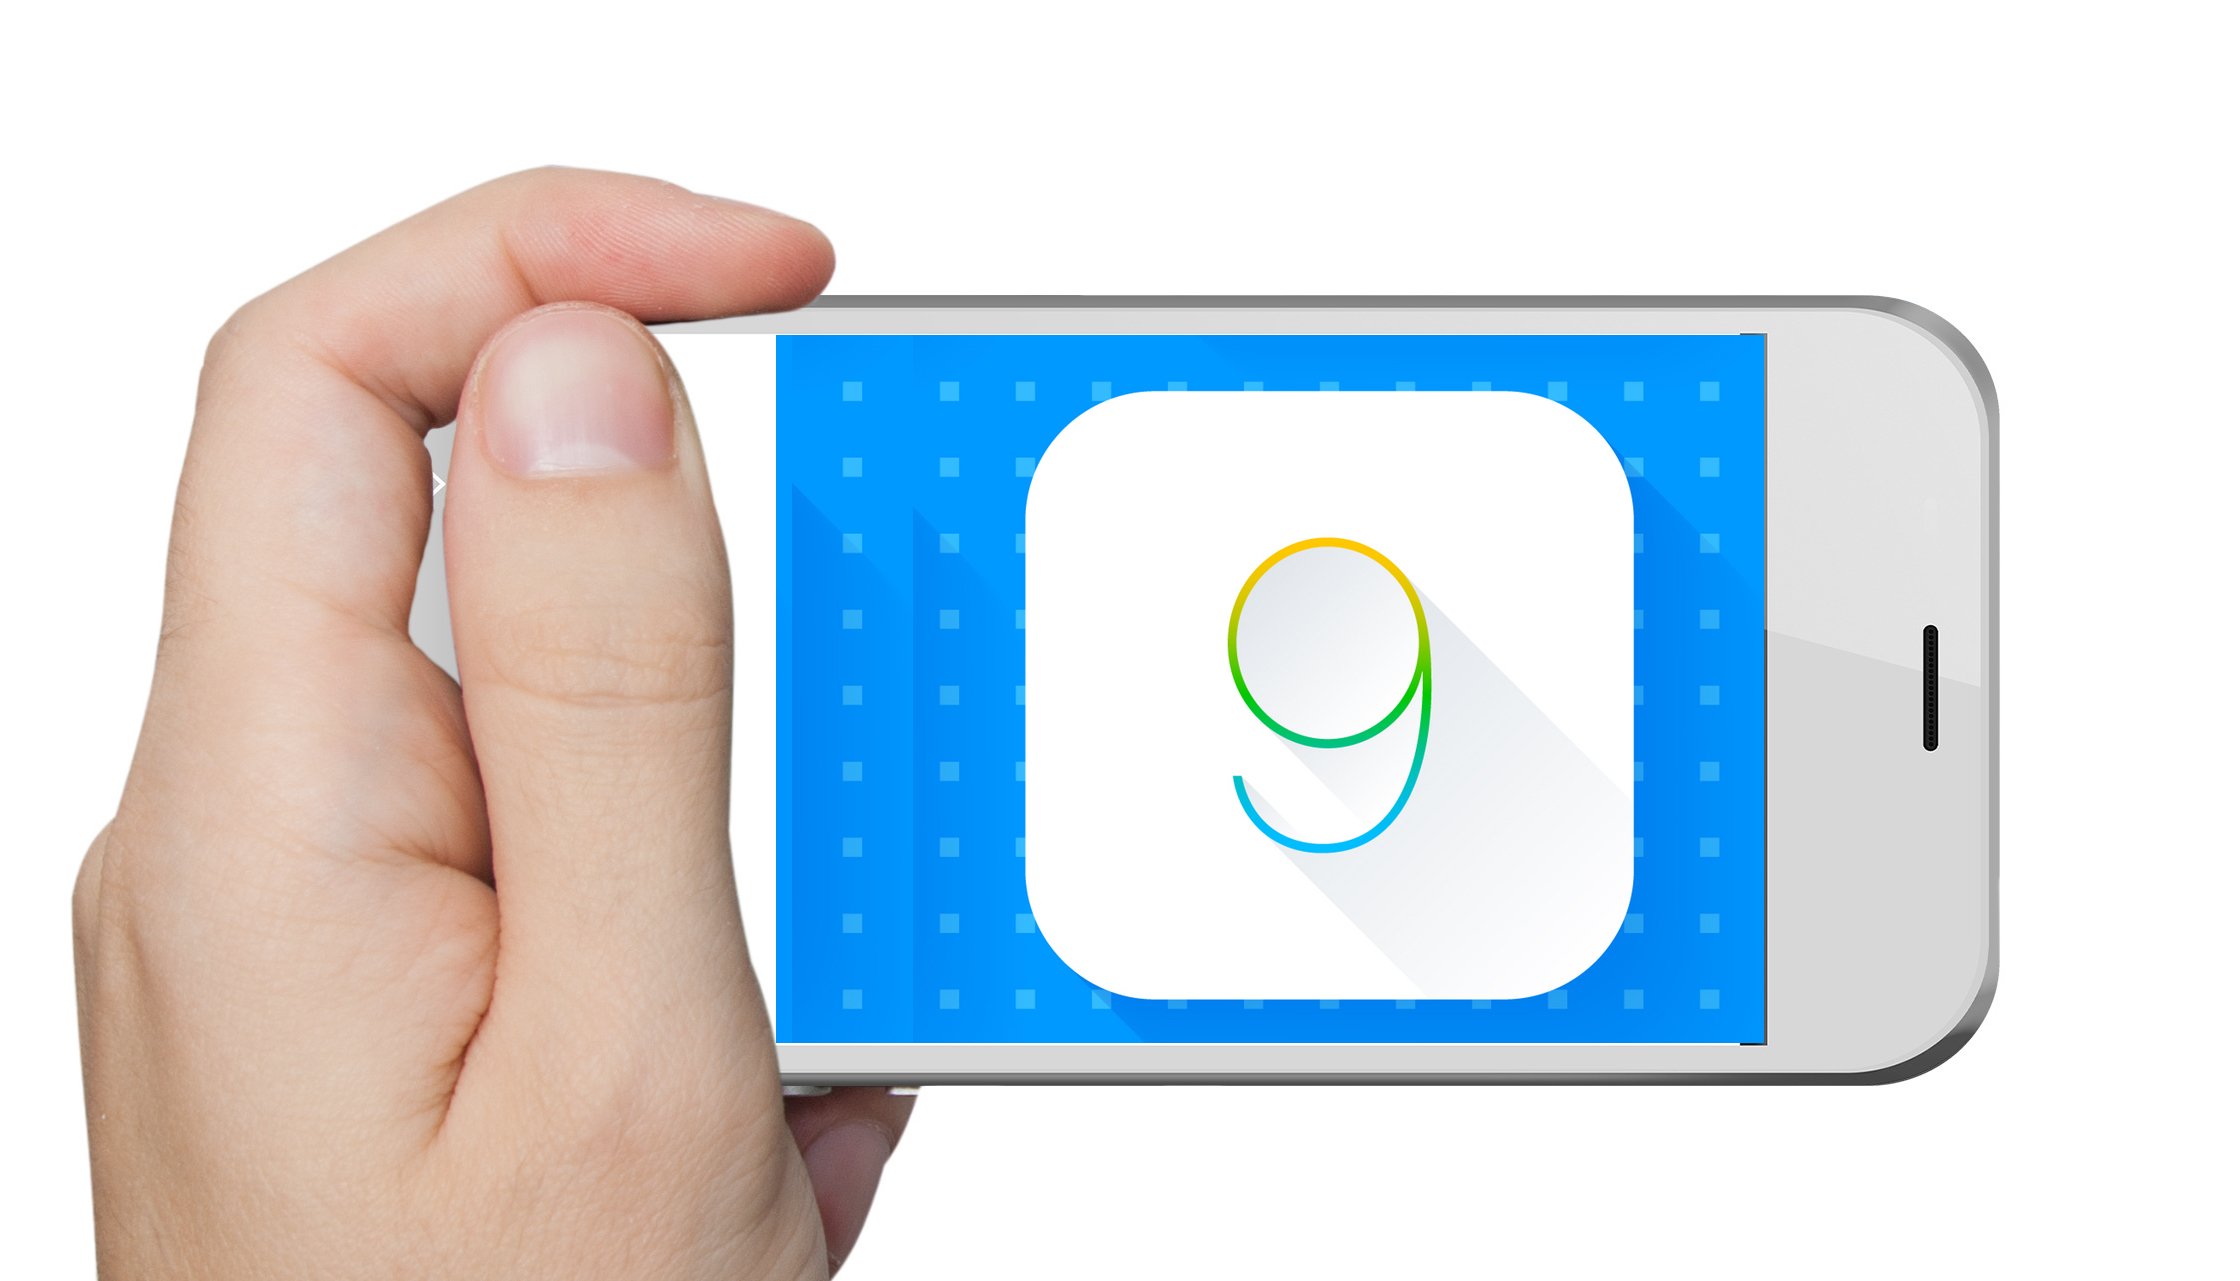 Check out these top iPhone features we want in the iOS 9 release.